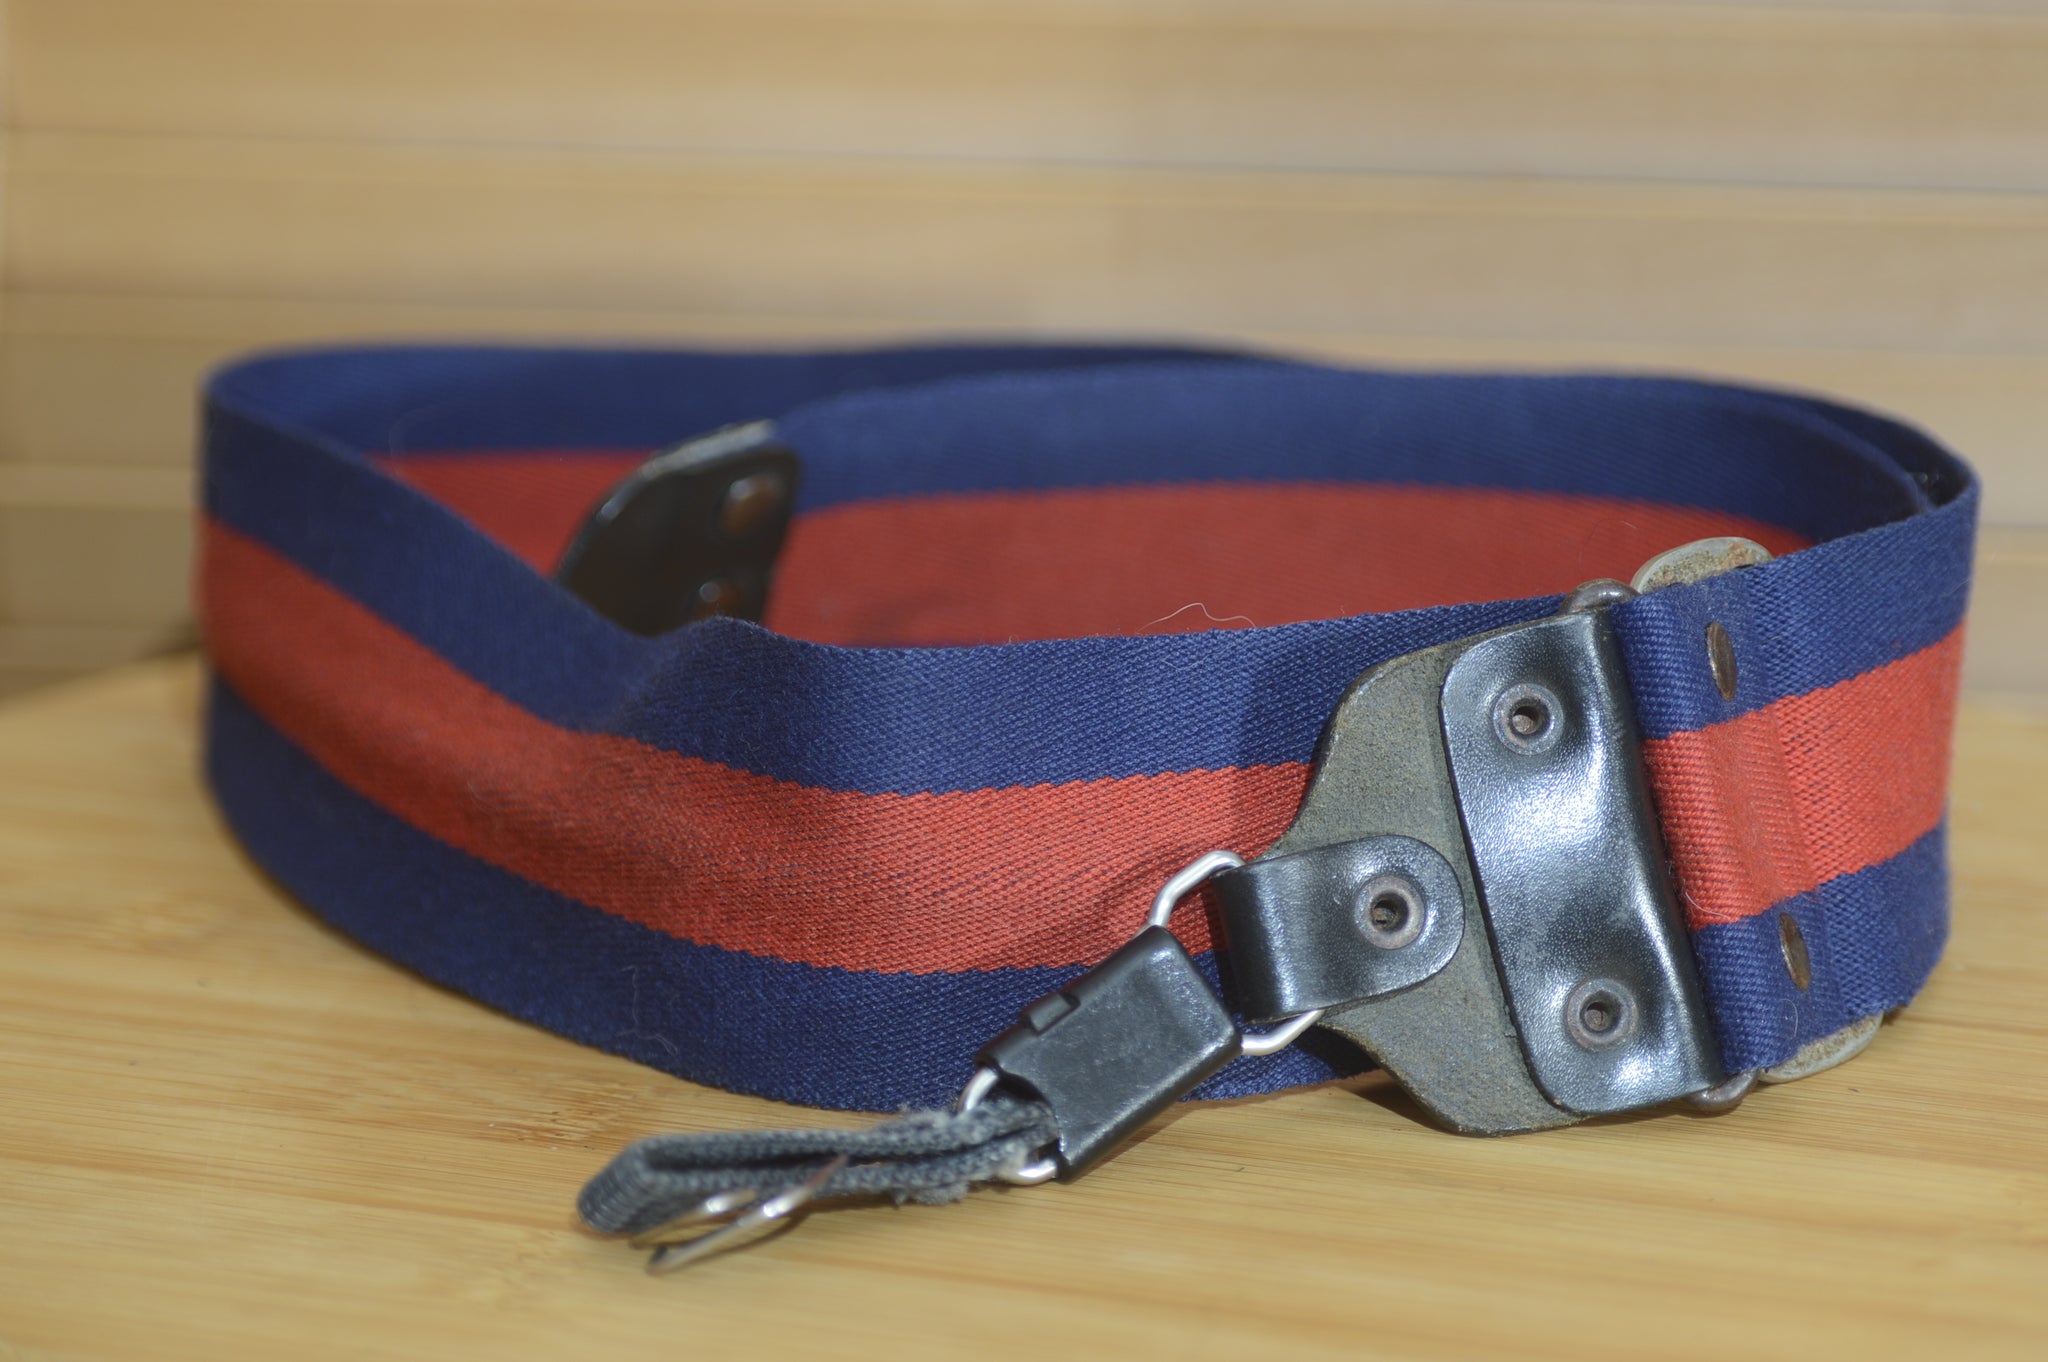 Blue and Red Haiser Vintage strap. A lovely addition to your any Vintage set up. - Rewind Cameras 